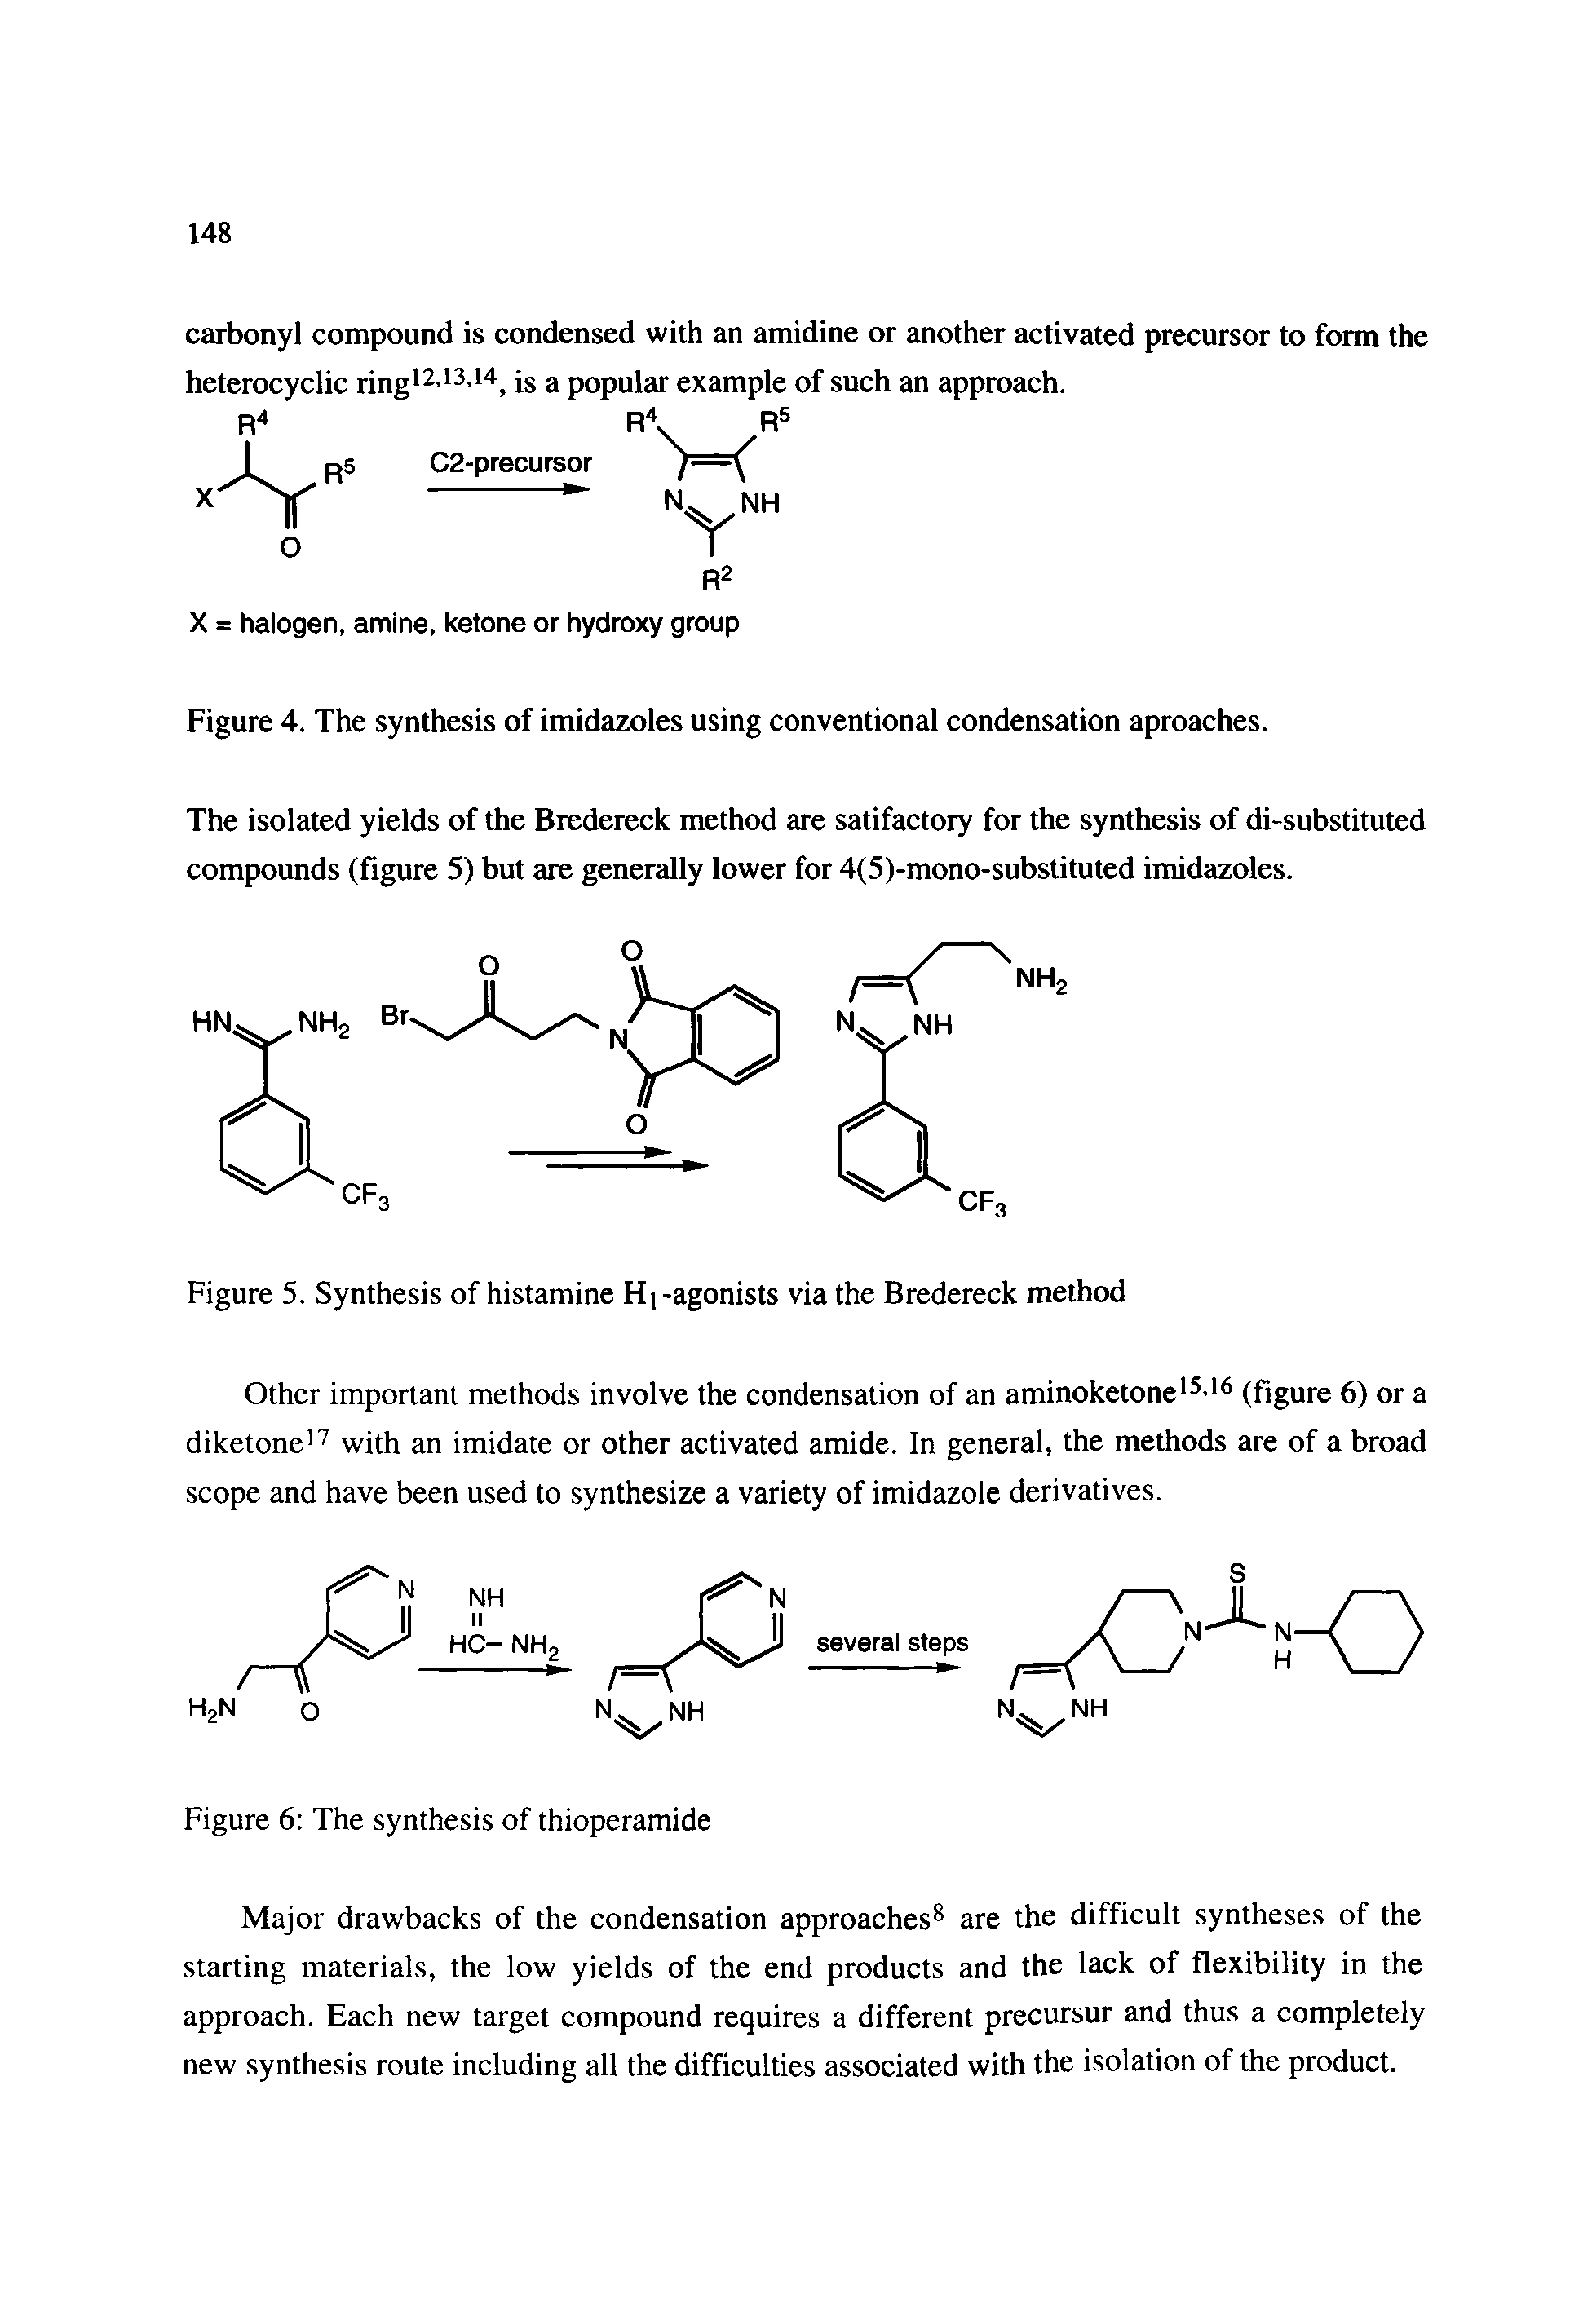 Figure 5. Synthesis of histamine H) -agonists via the Bredereck method...